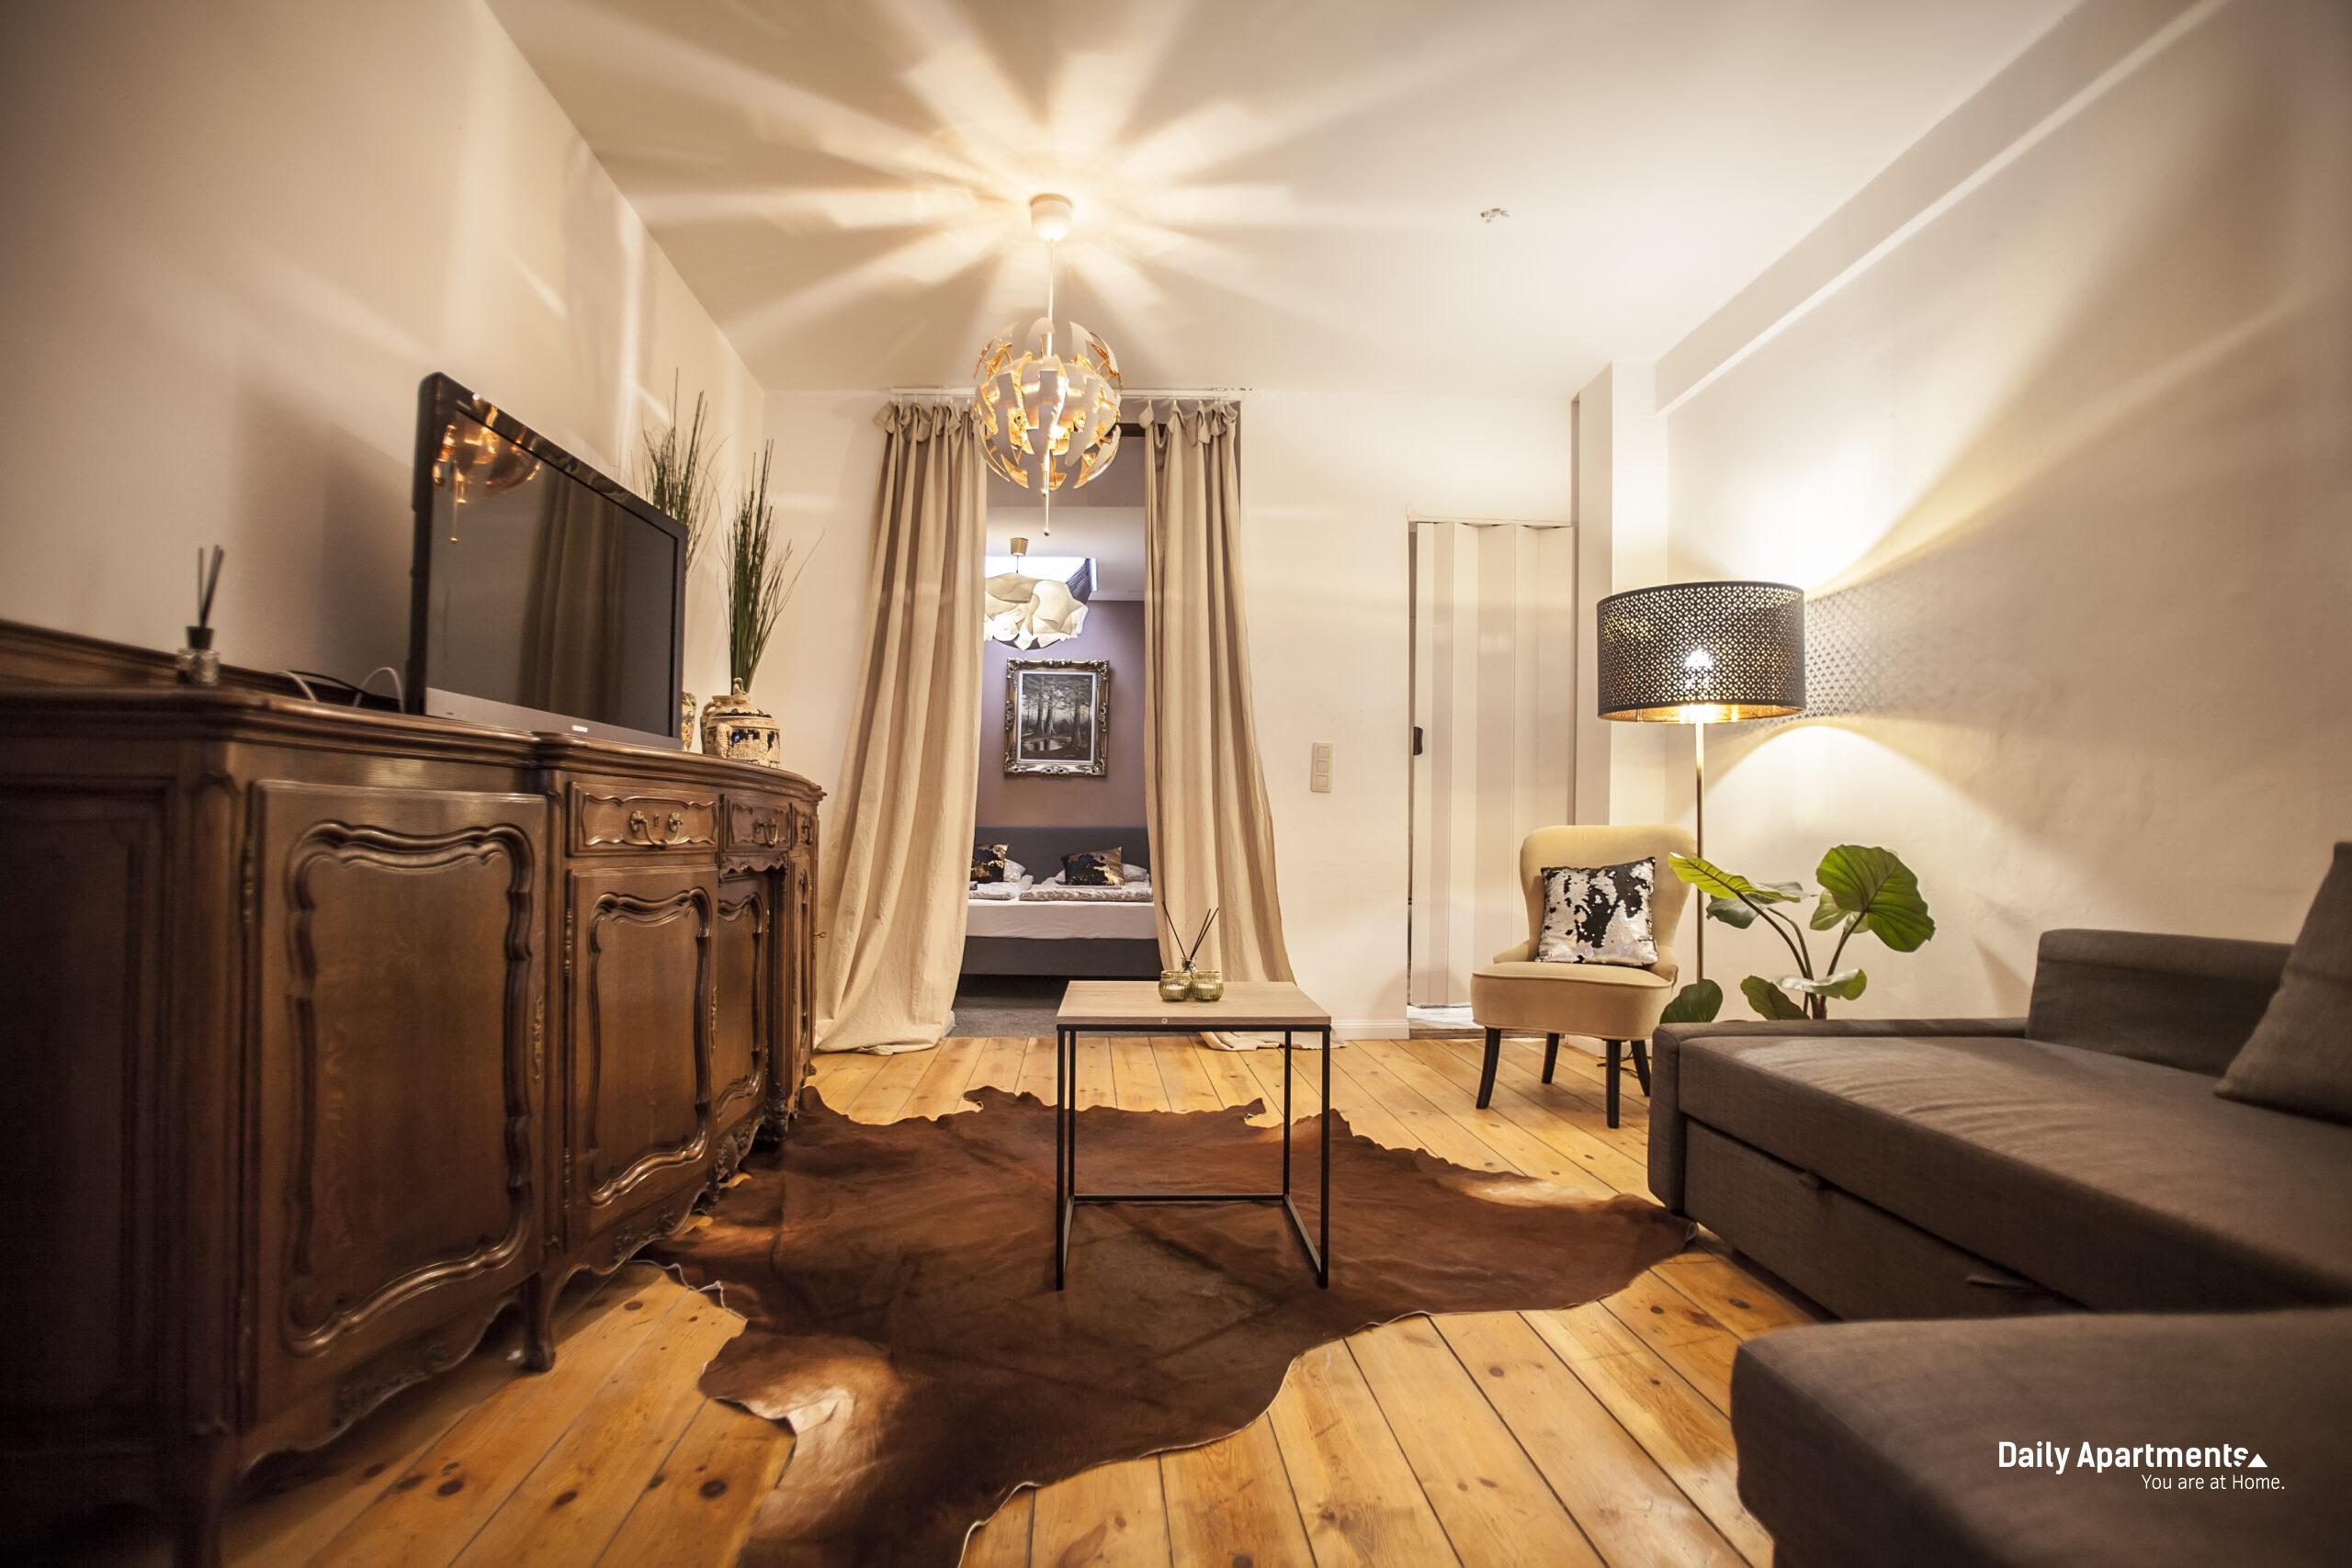 Daily Apartments - Antwerp City - Ground floor apartment with bath